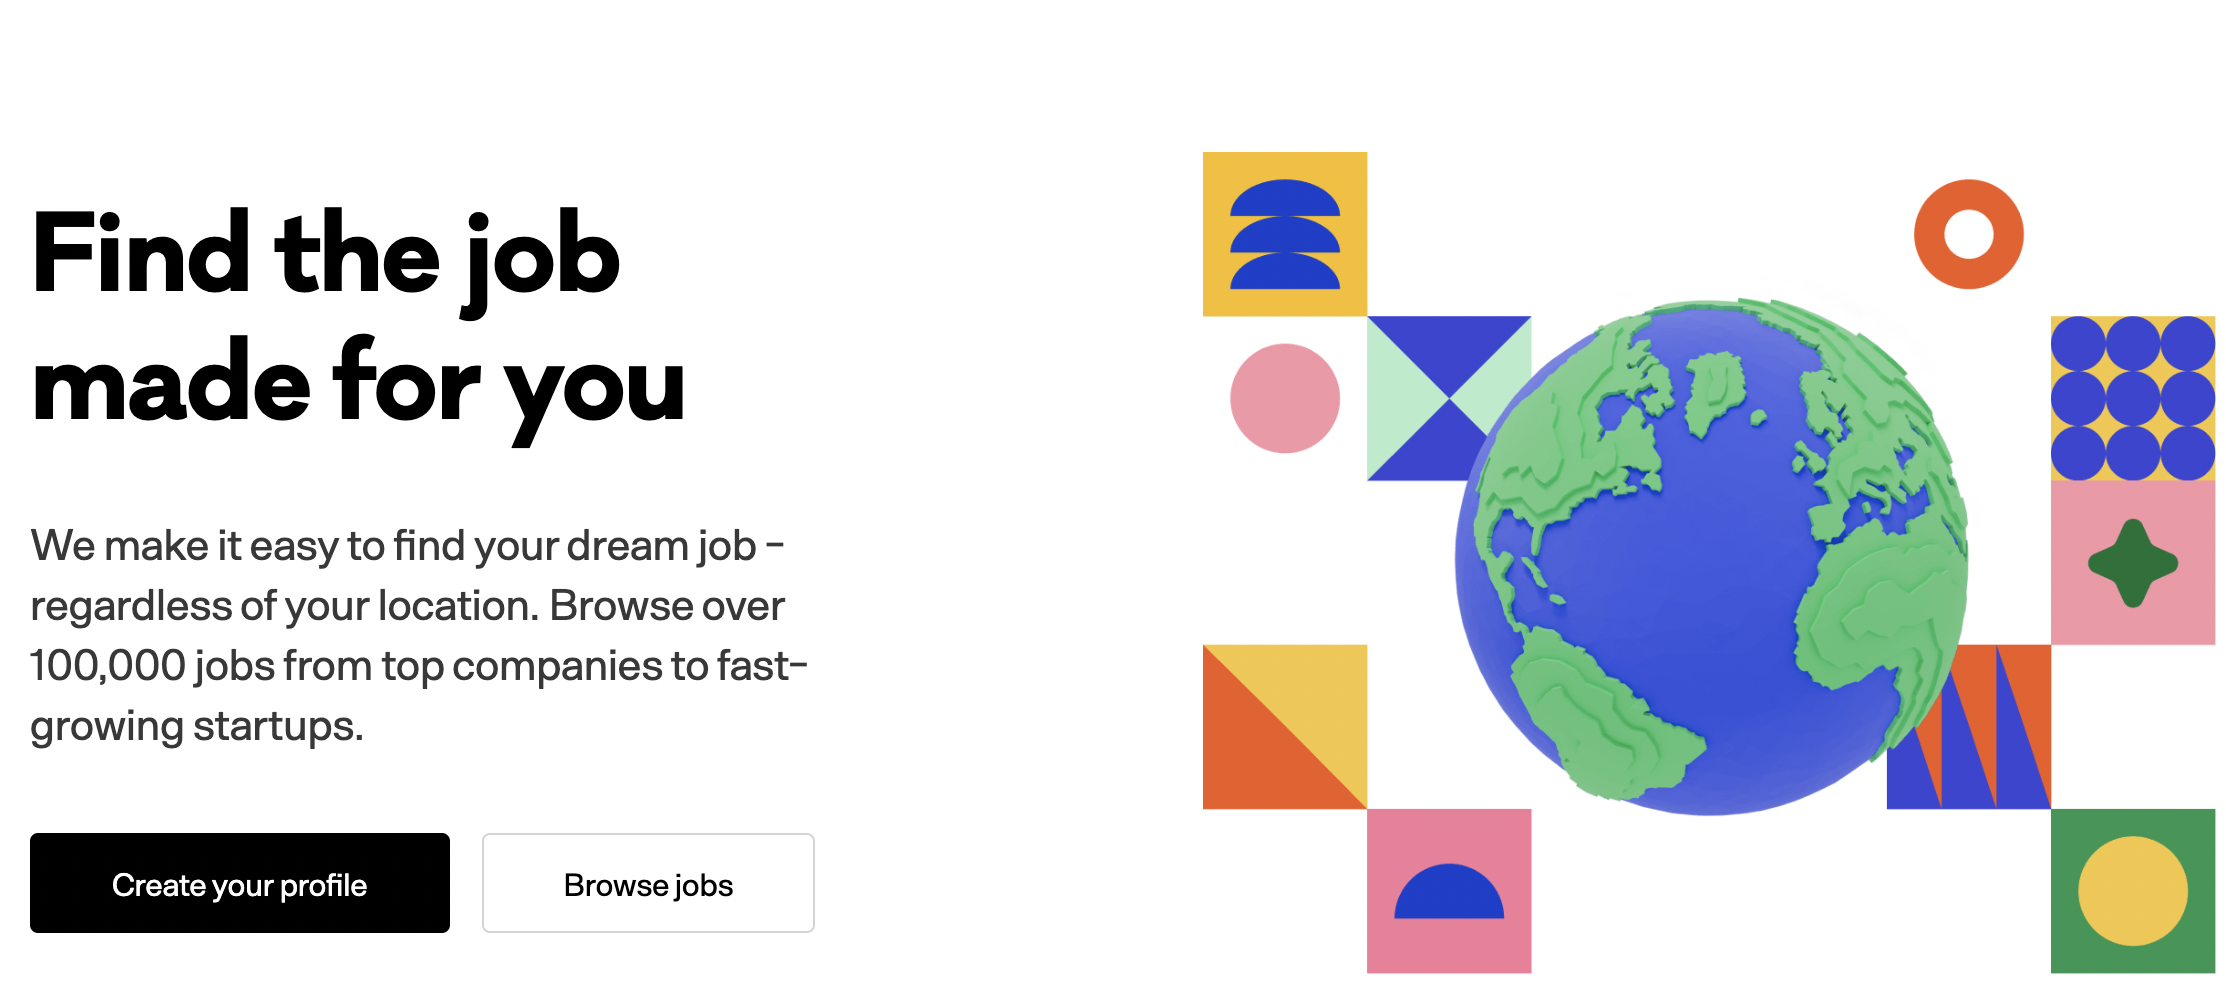 angellist job board startup role open hiring landing page find the job you love